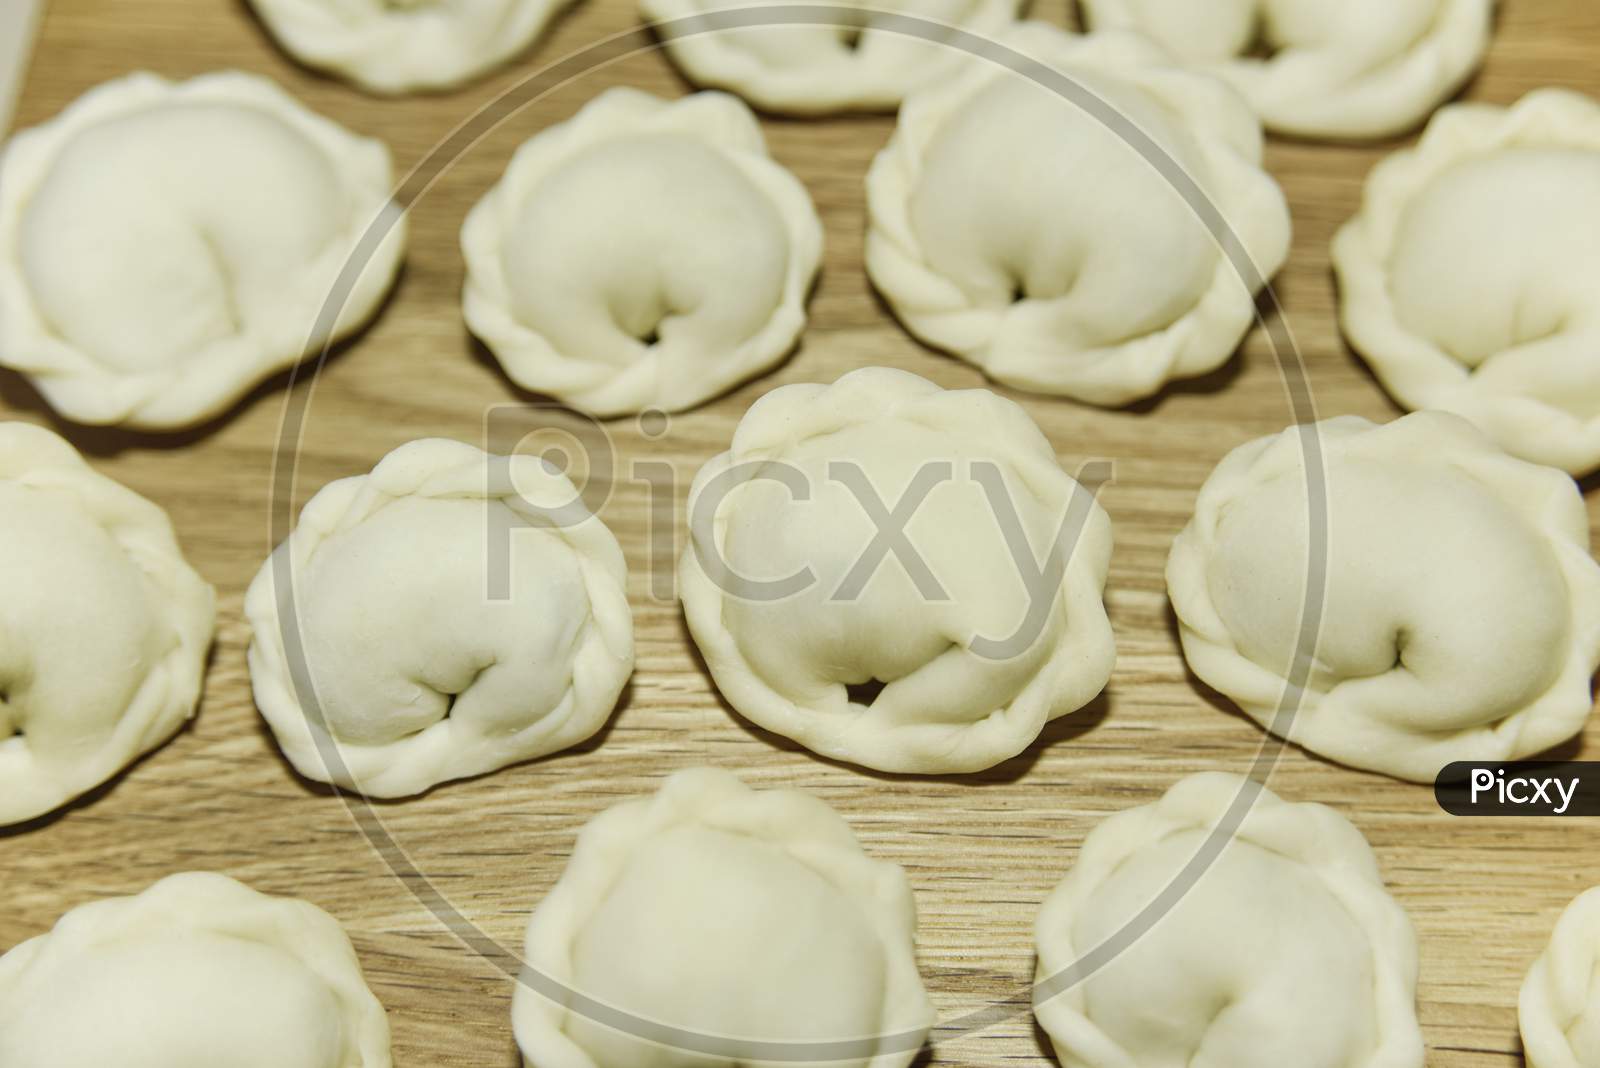 Many Round Dumplings From The Close Top View. Selective Focus.